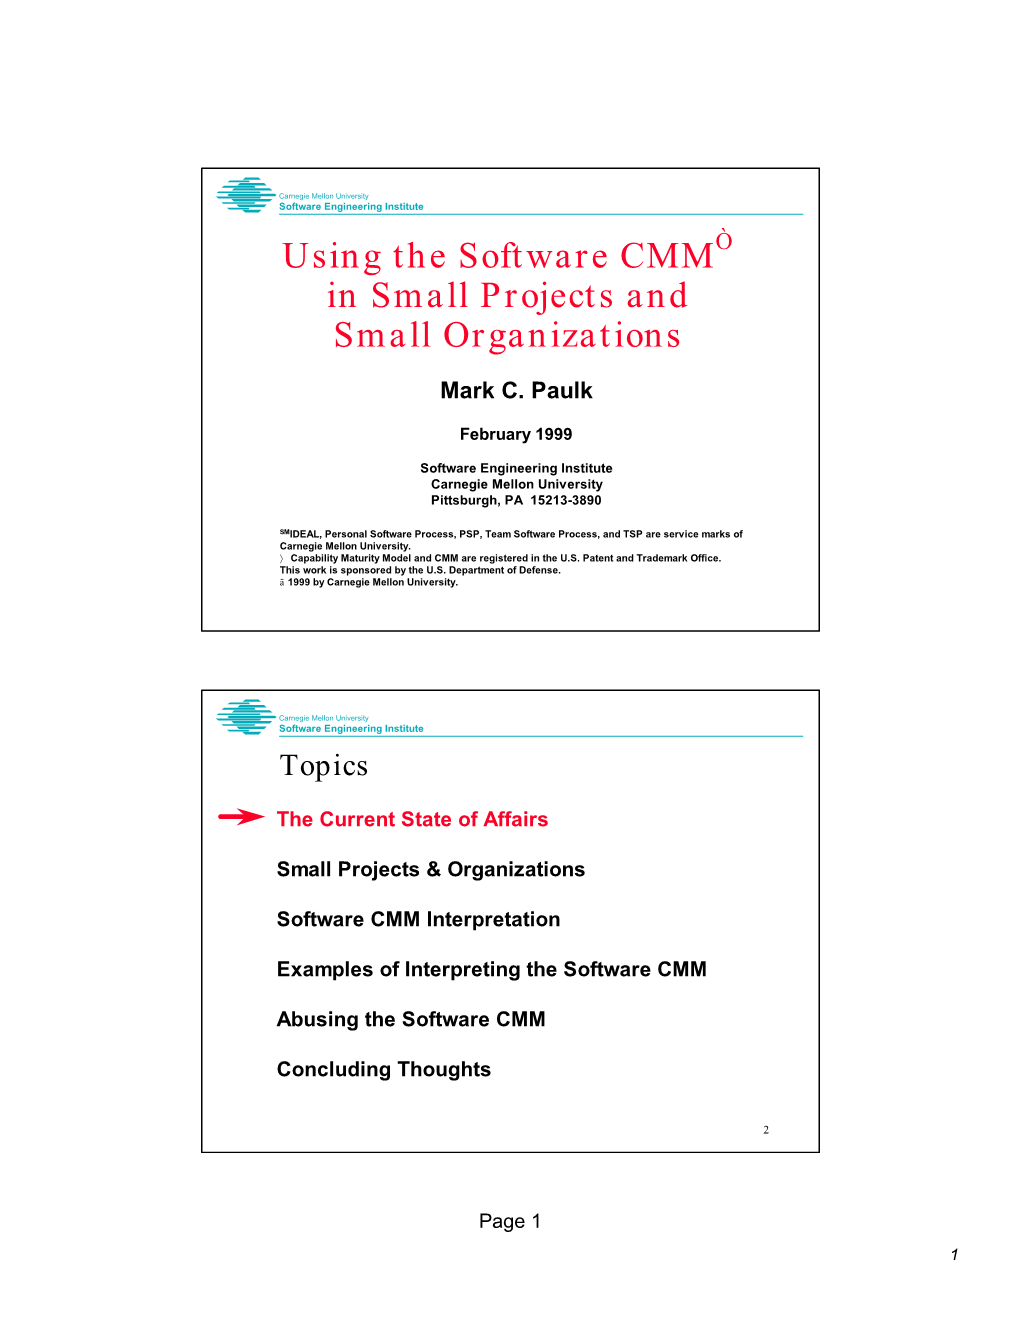 Using the Software CMM in Small Projects and Small Organizations